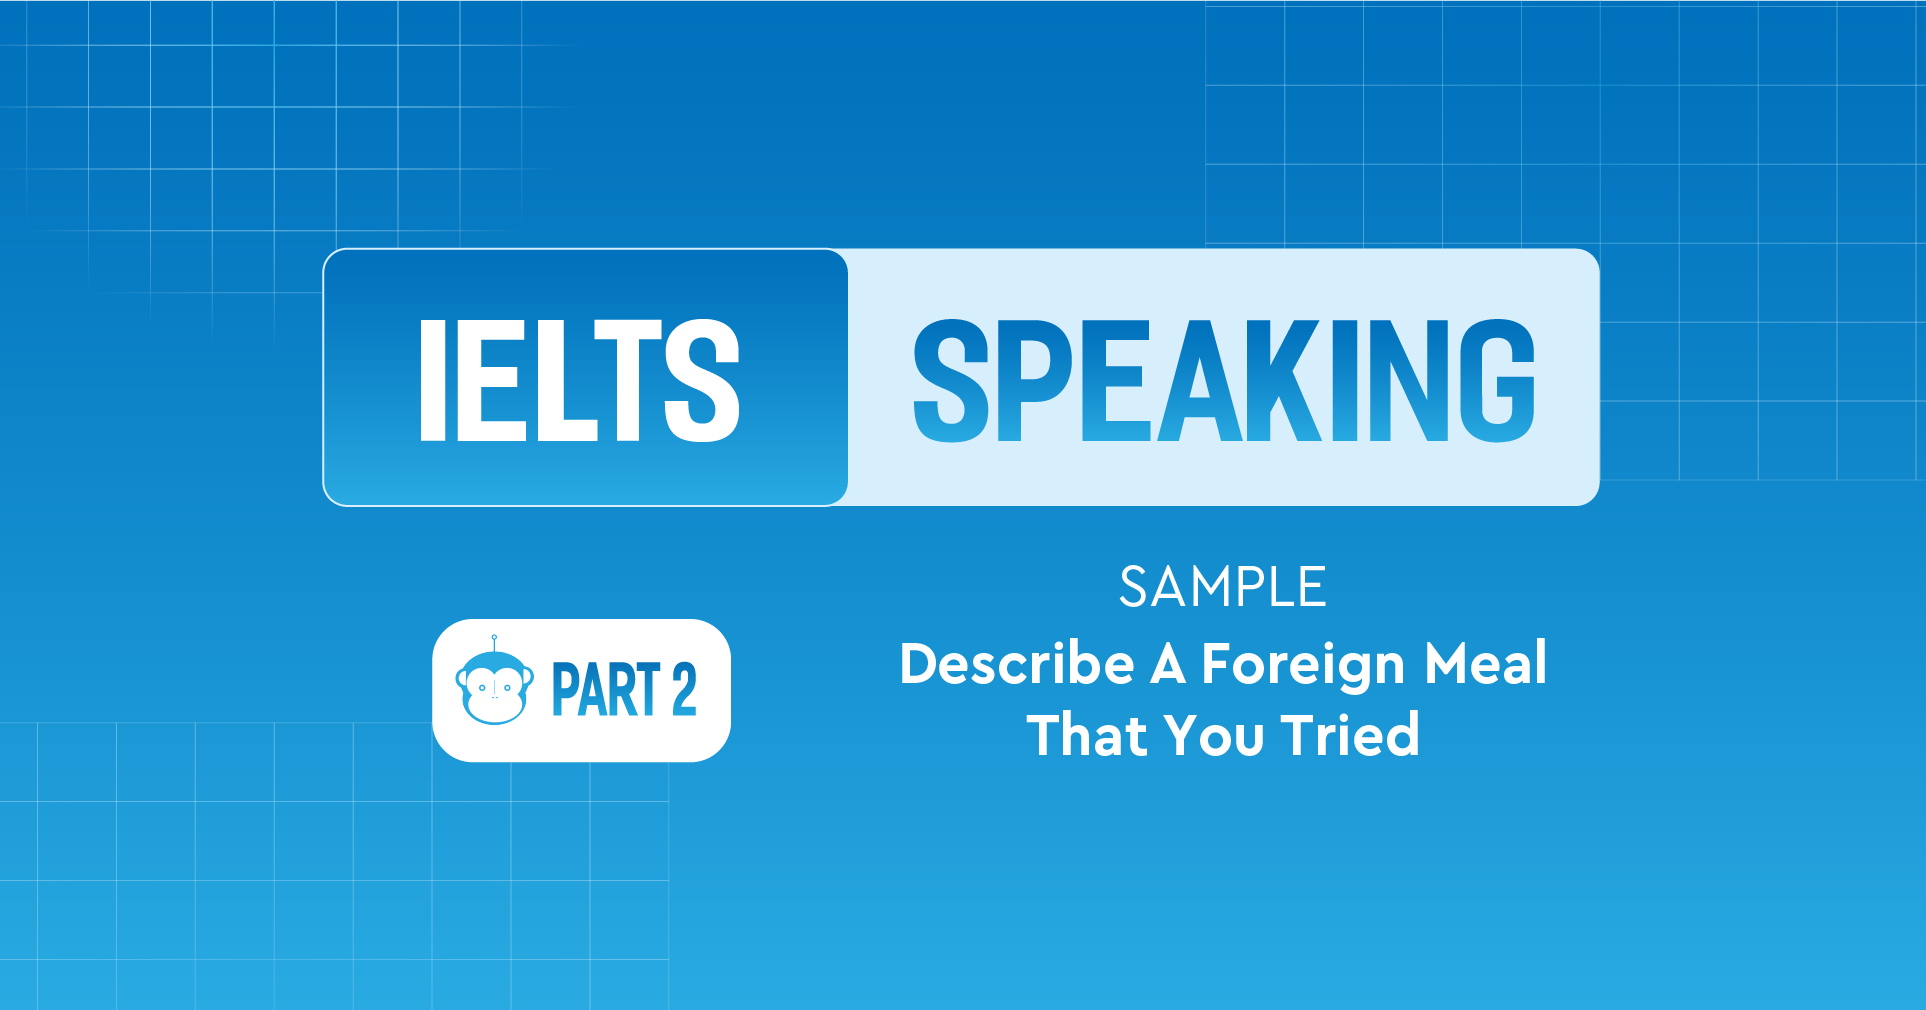 Sample IELTS Speaking Part 2: Describe A Foreign Meal That You Tried